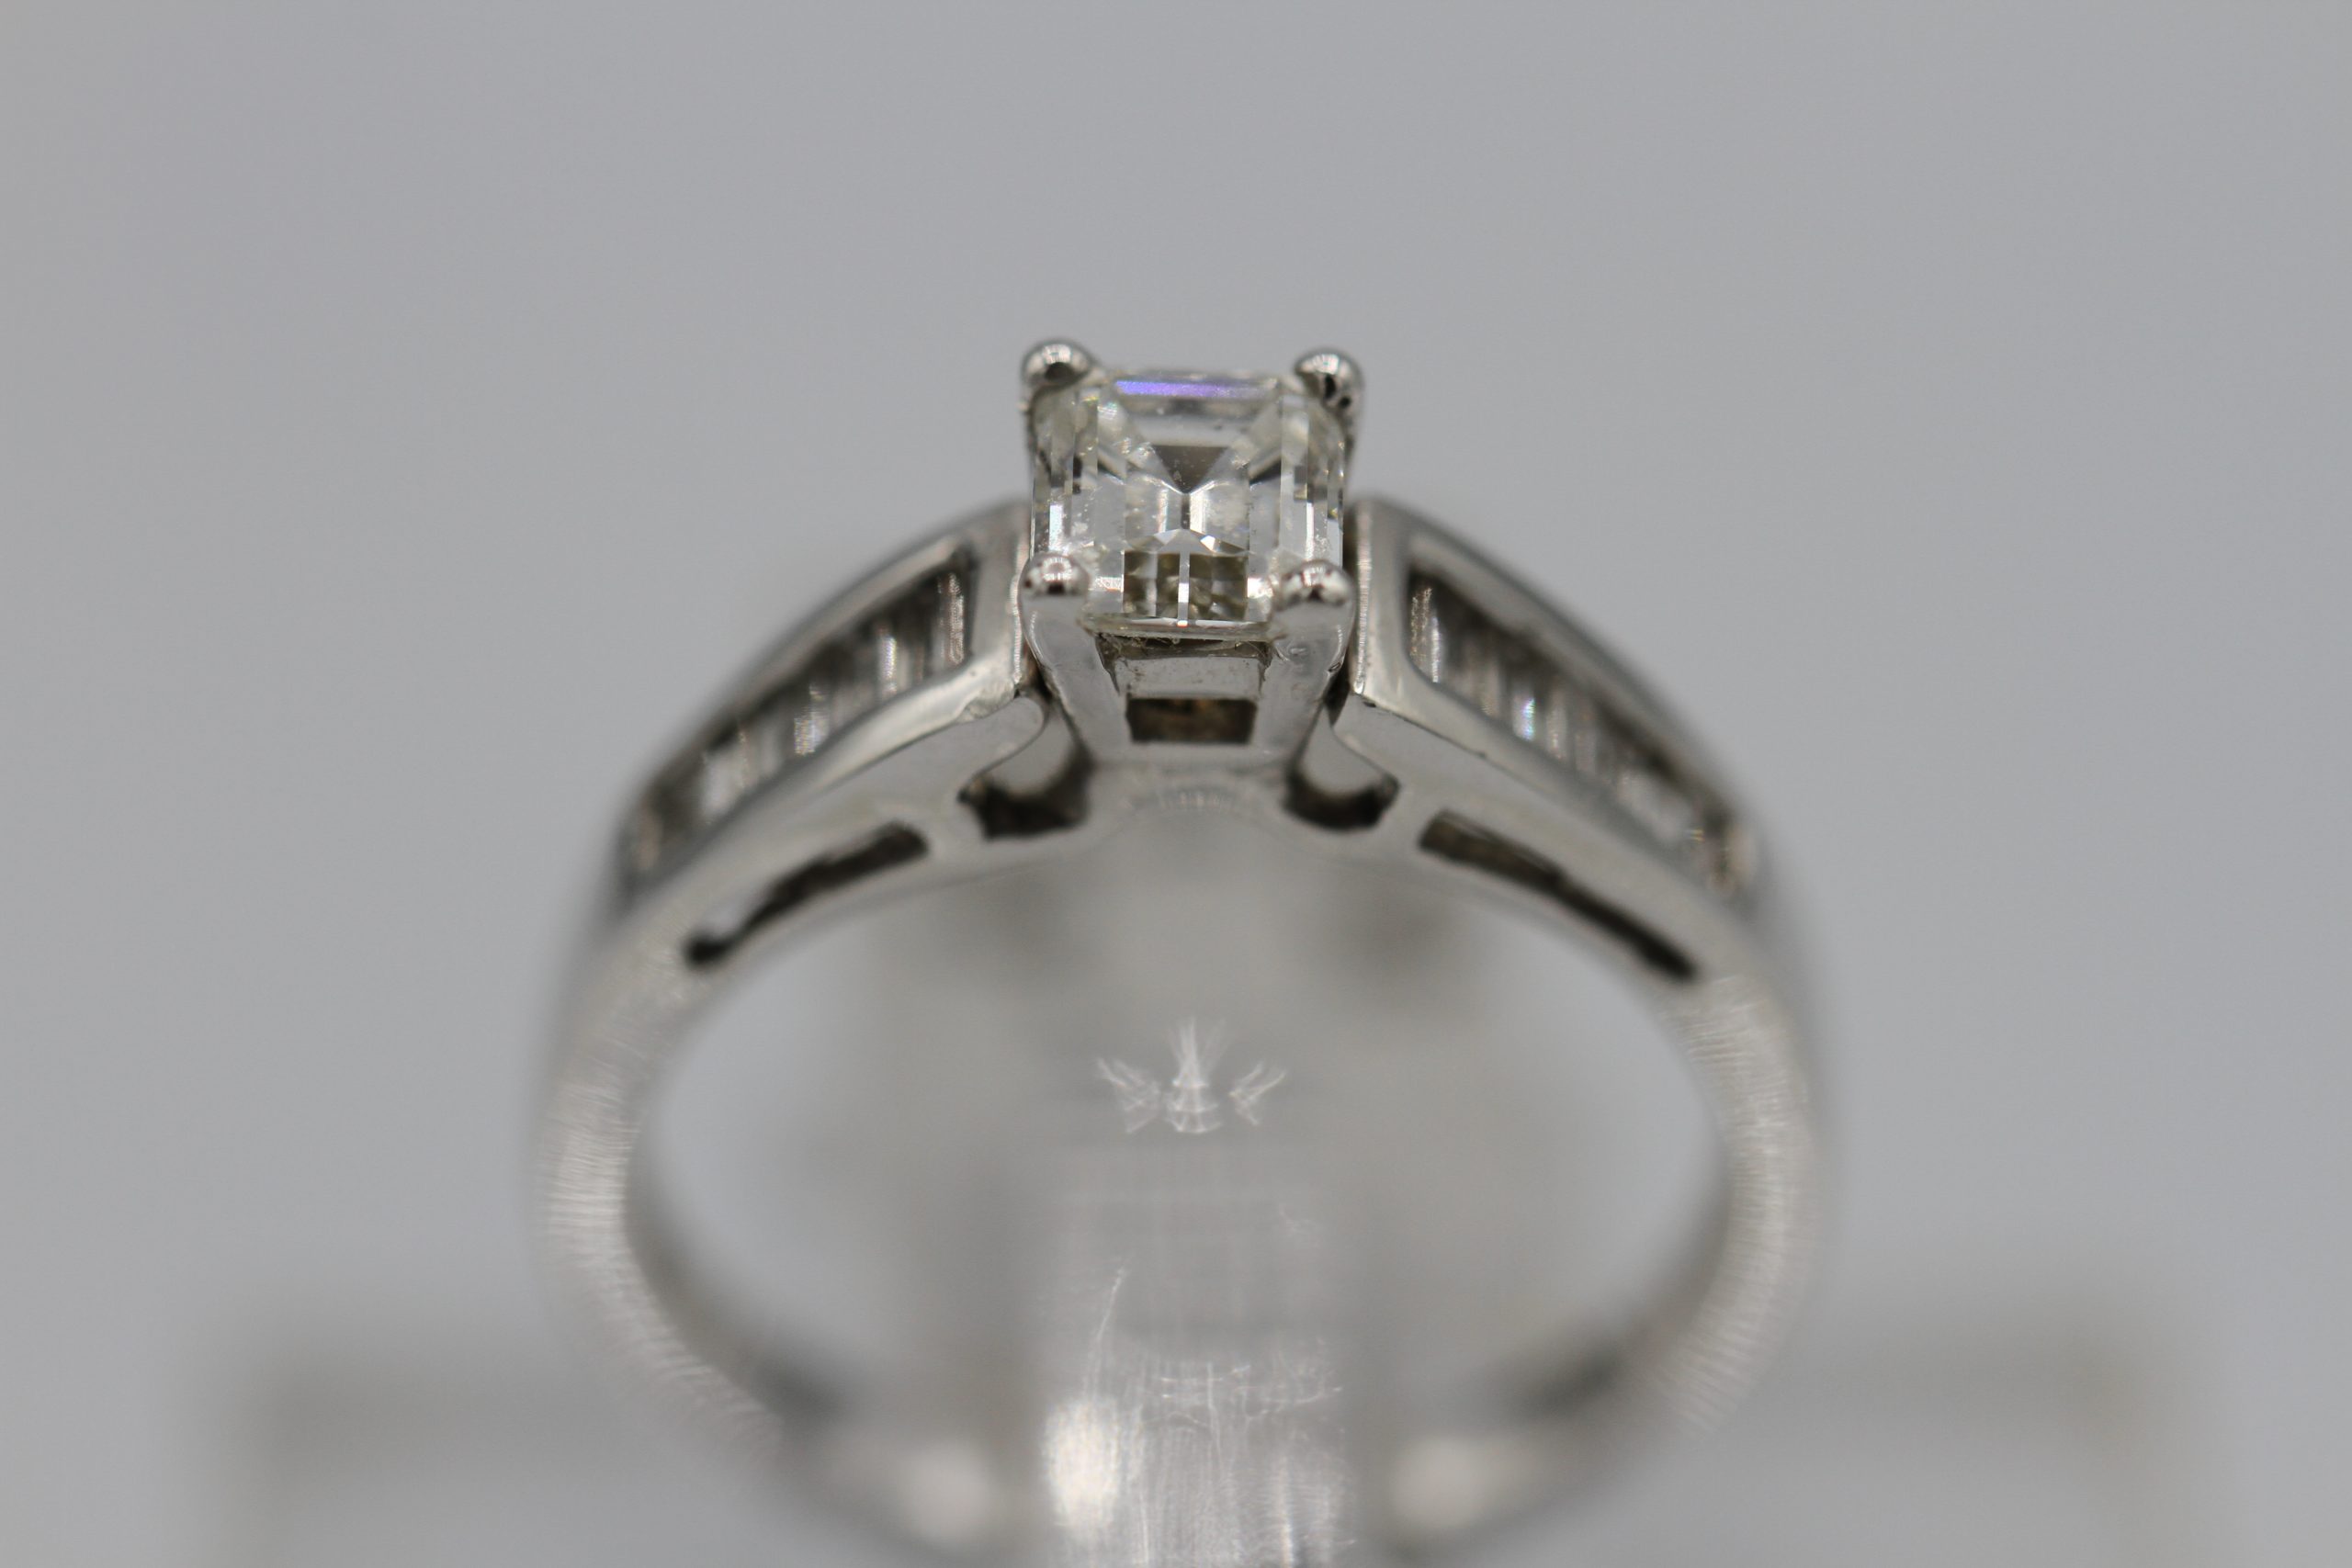 A silver ring with diamond centerpiece